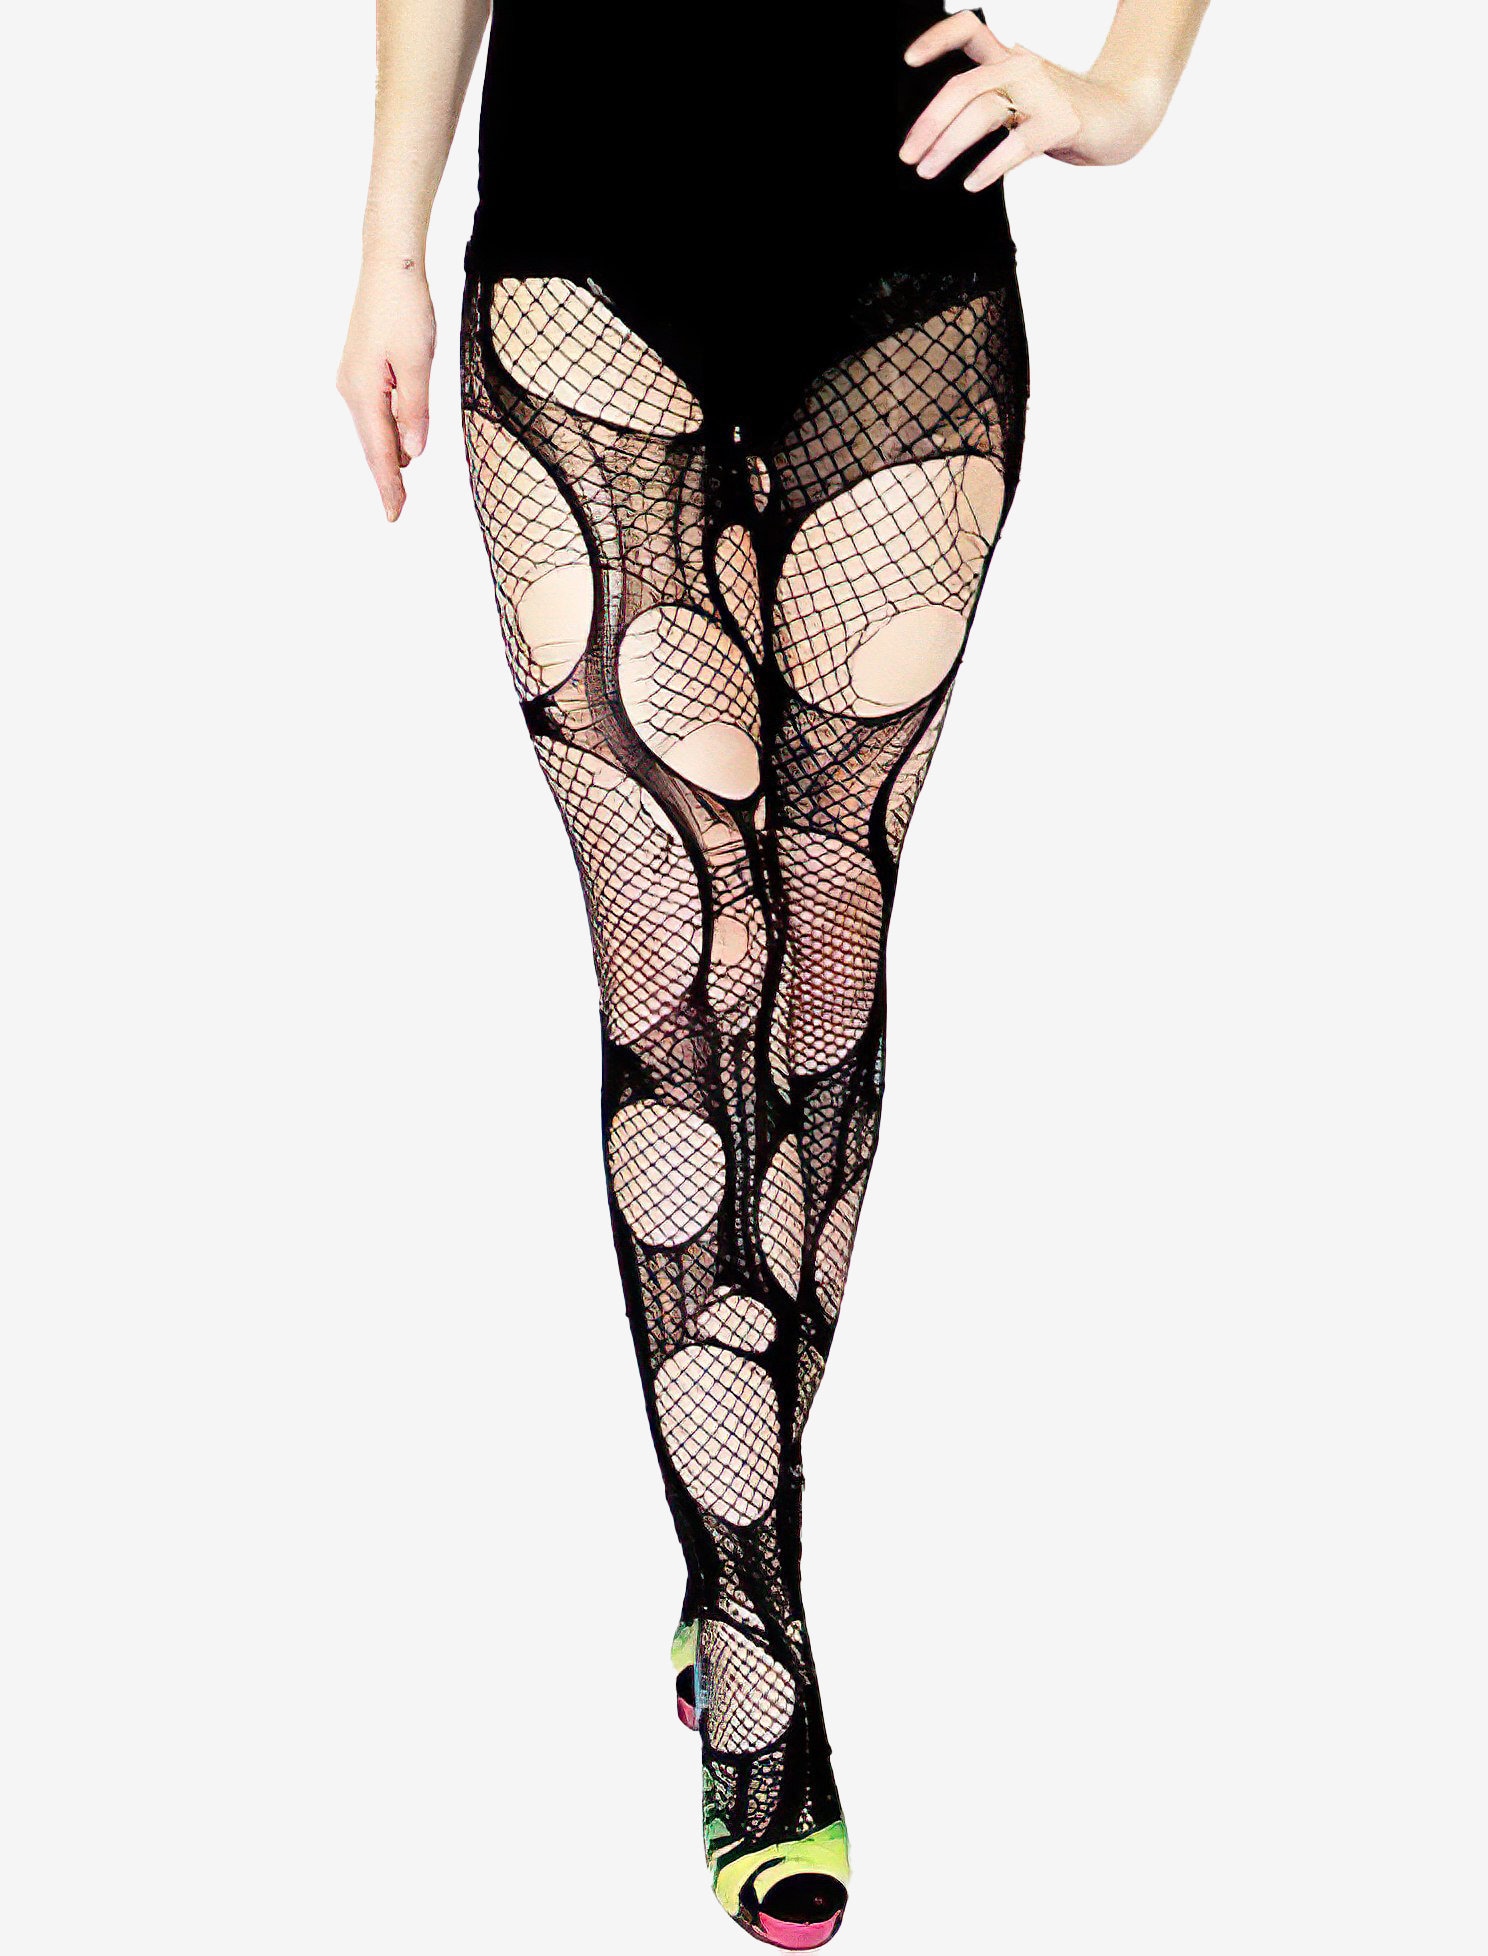 Ripped Tights Black Red Fishnet Tights Distressed Tights Torn